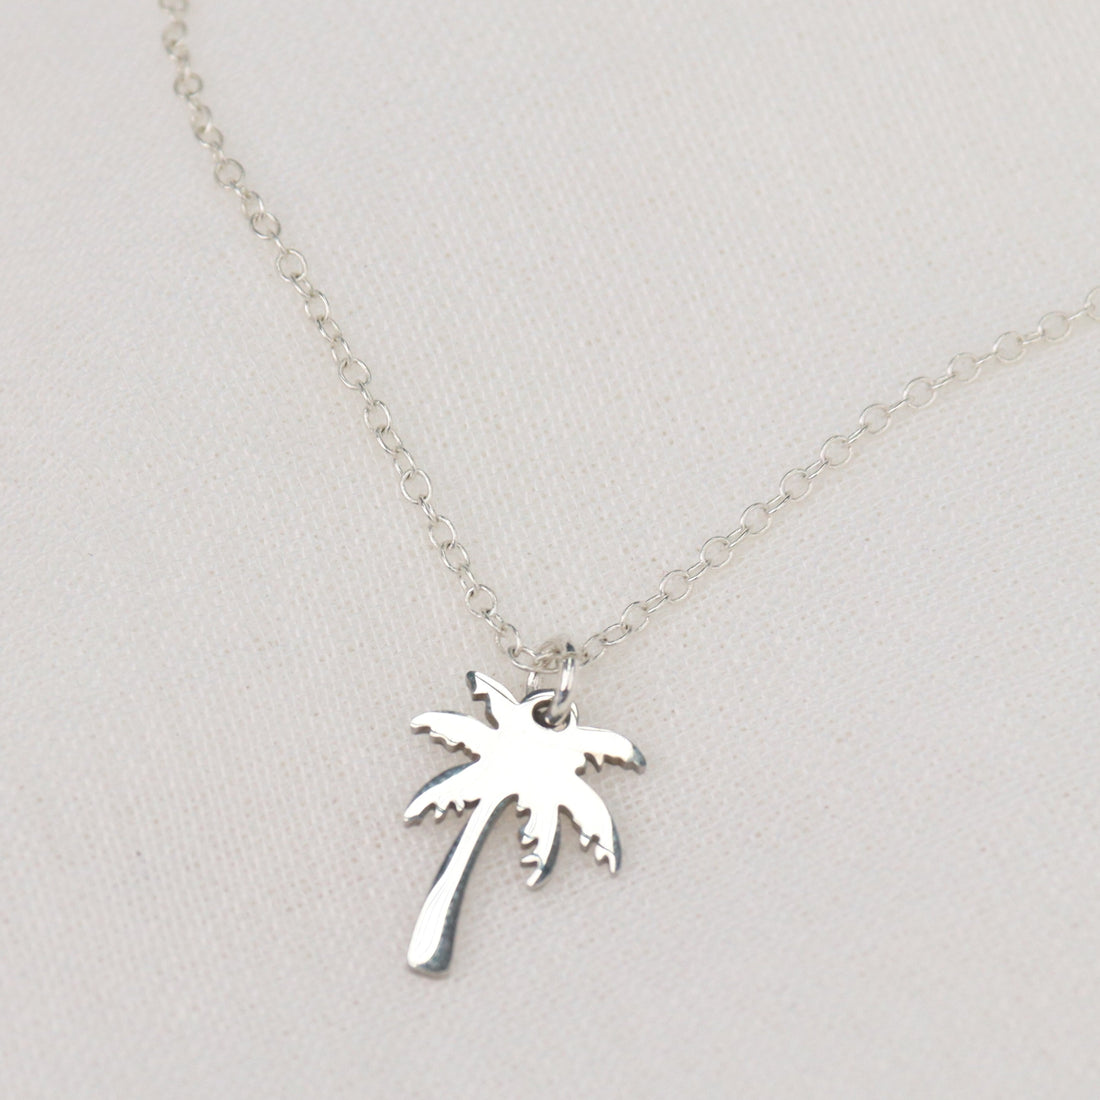 Coco | Coconut Palm Tree 18K Gold Plated or Stainless Steel Pendant Chain